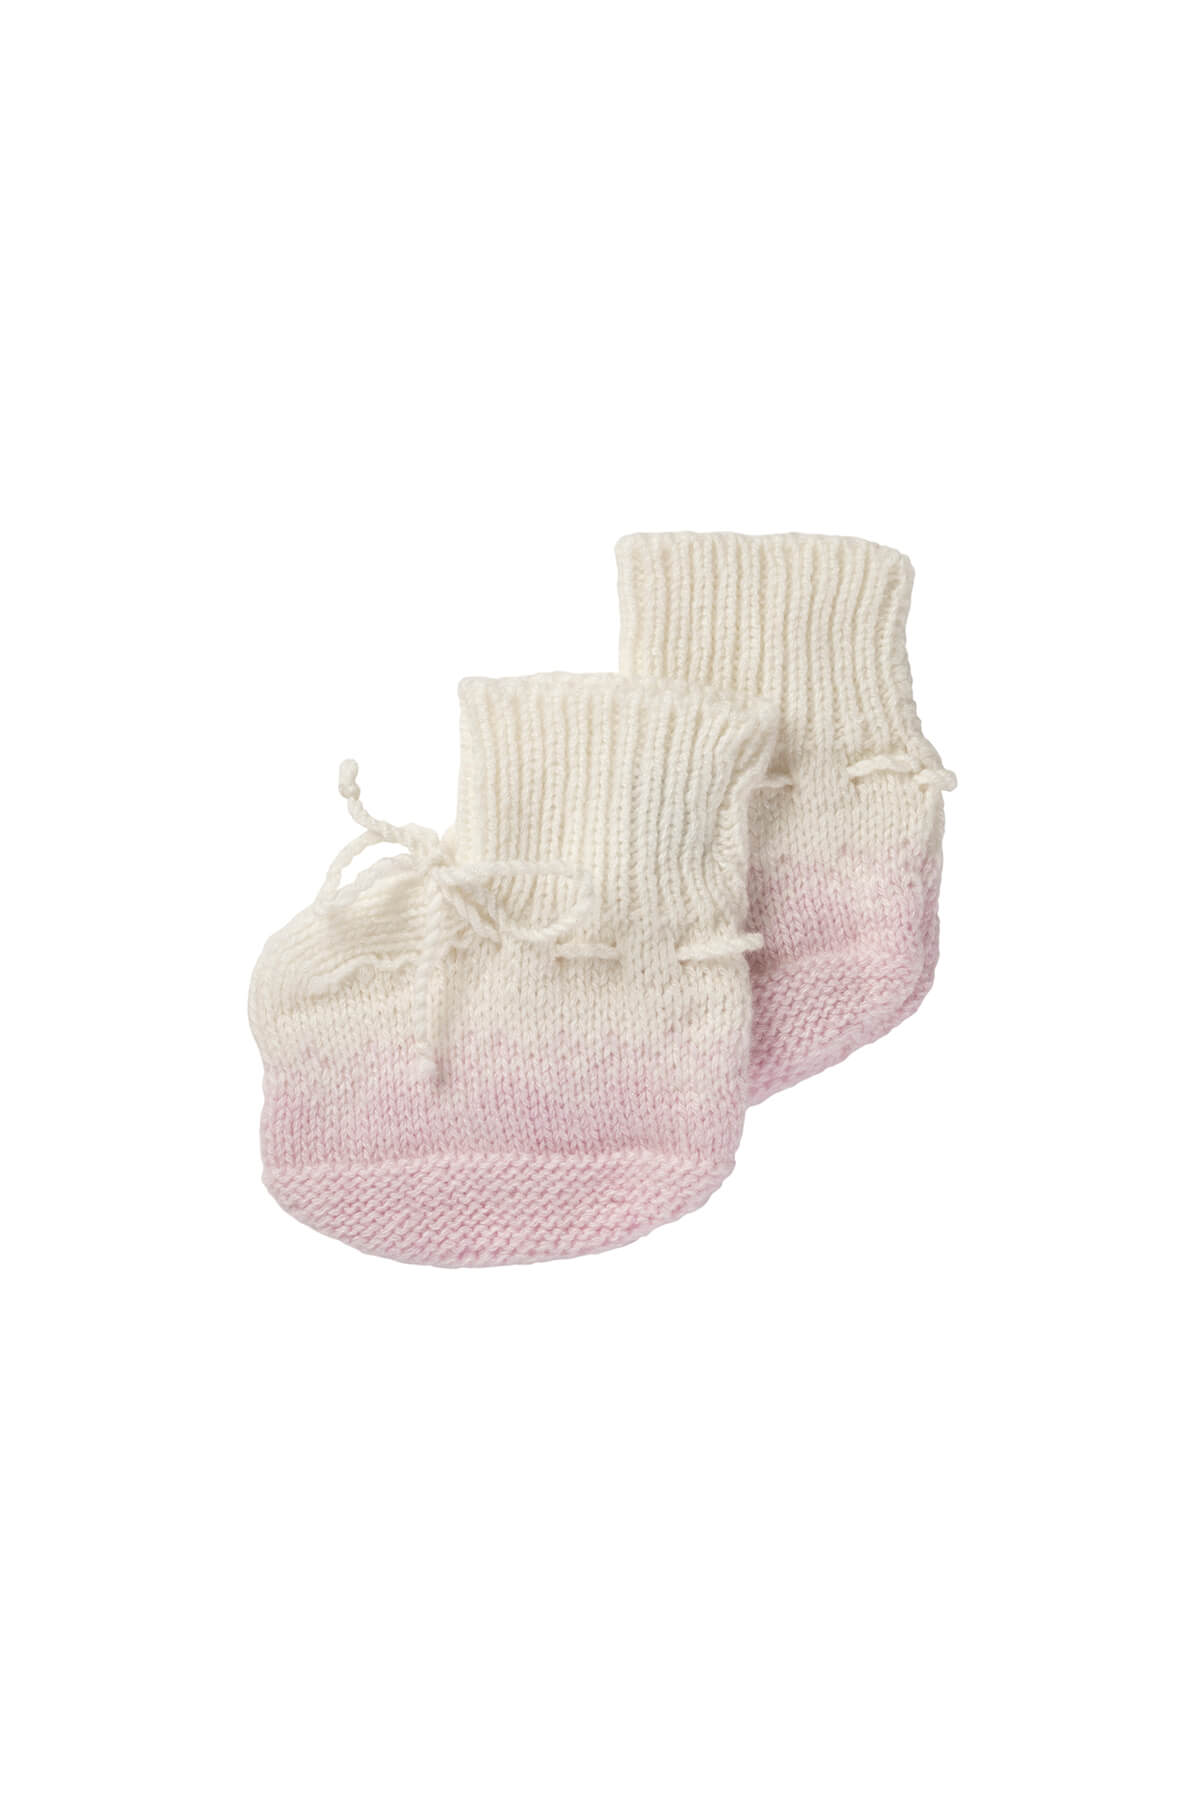 Johnstons of Elgin Gift Set includes our Cashmere Ombre Baby Hat, Mittens & Booties in Blush AW21GIFTSET22B